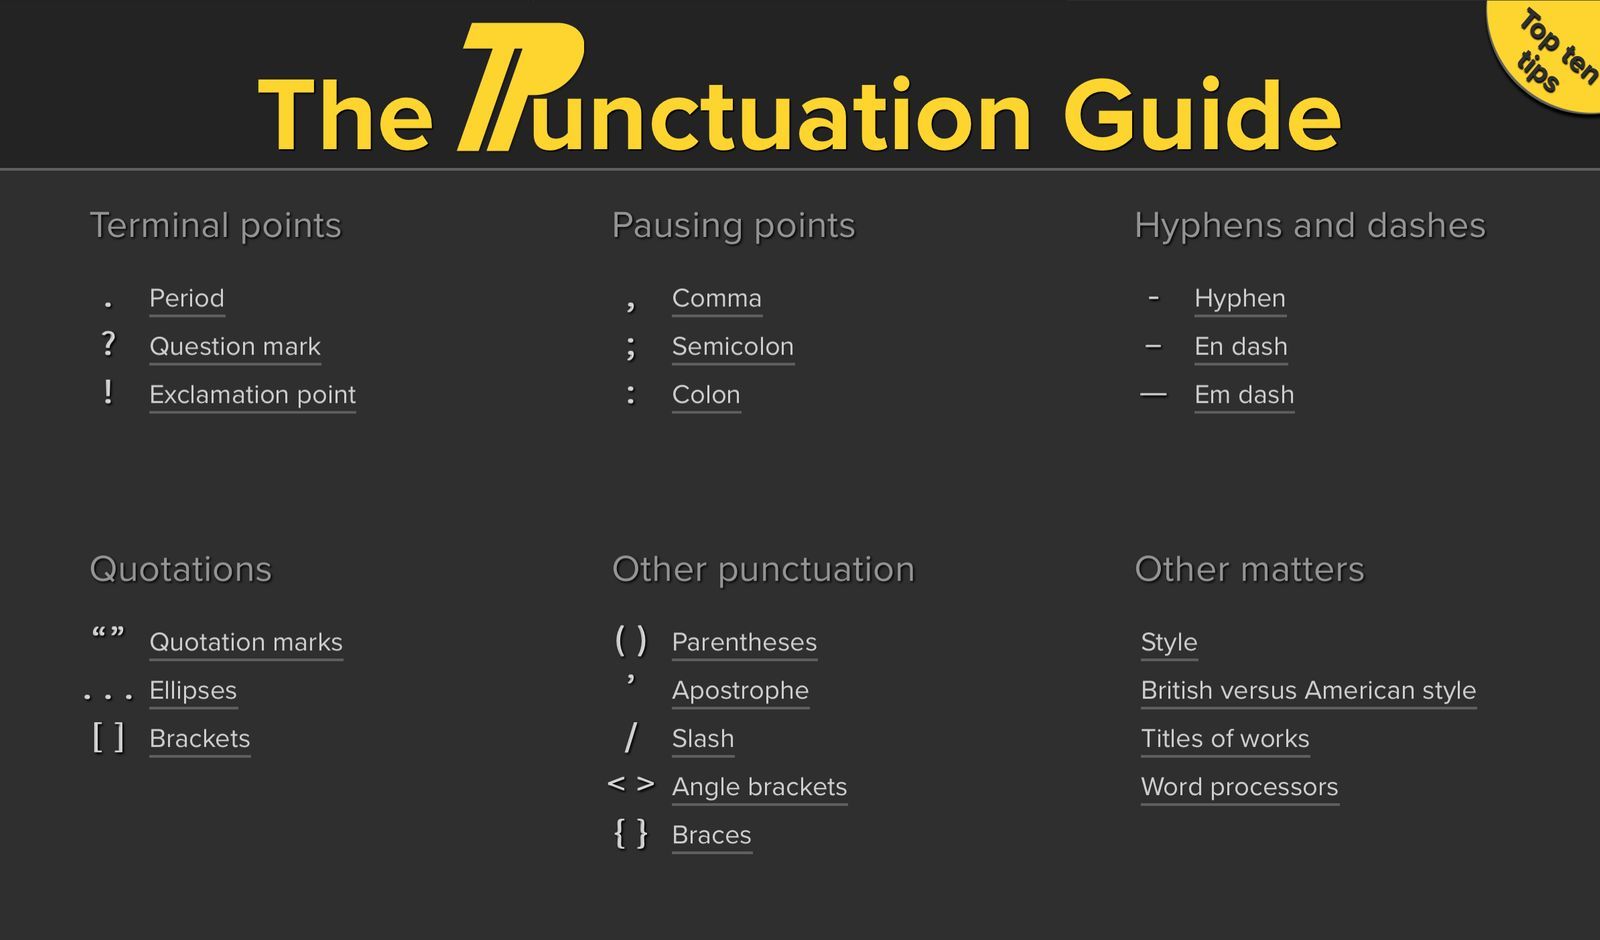 The Punctuation Guide website